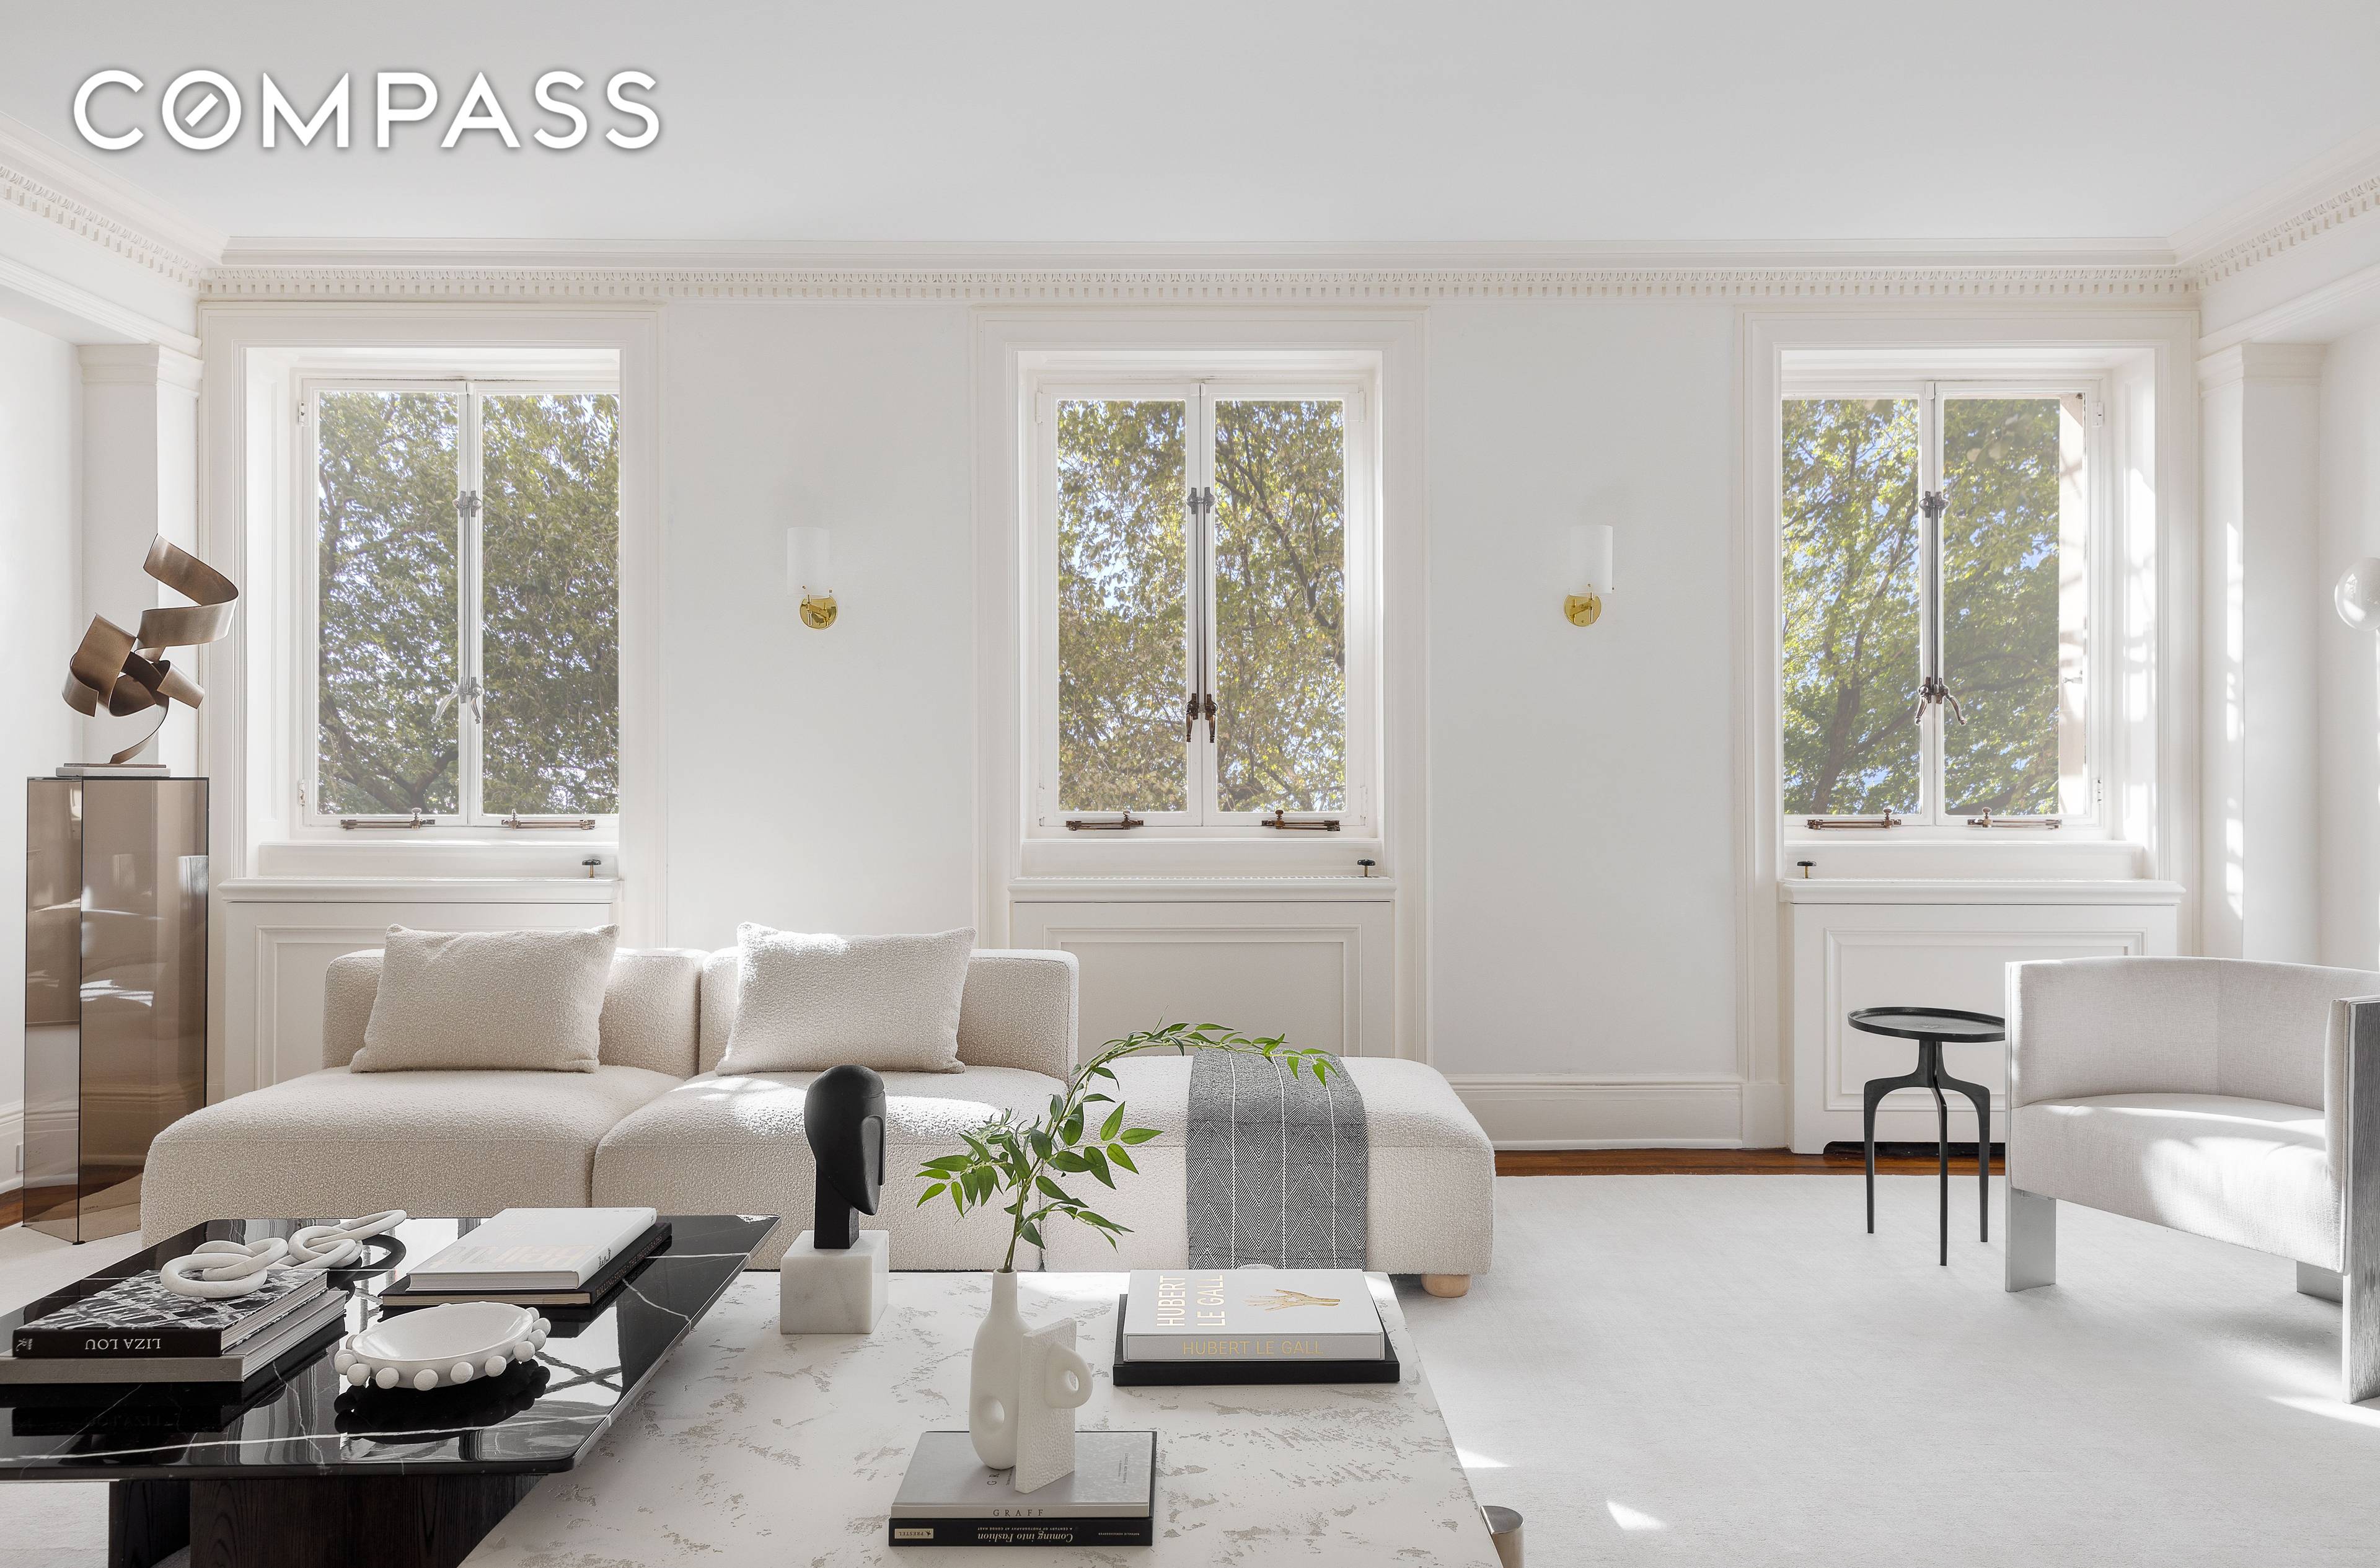 This stunning and supremely elegant Fifth Avenue residence has been impeccably renovated, featuring direct views of Central Park, grand proportions, a magnificent conservatory and its own private outdoor space.